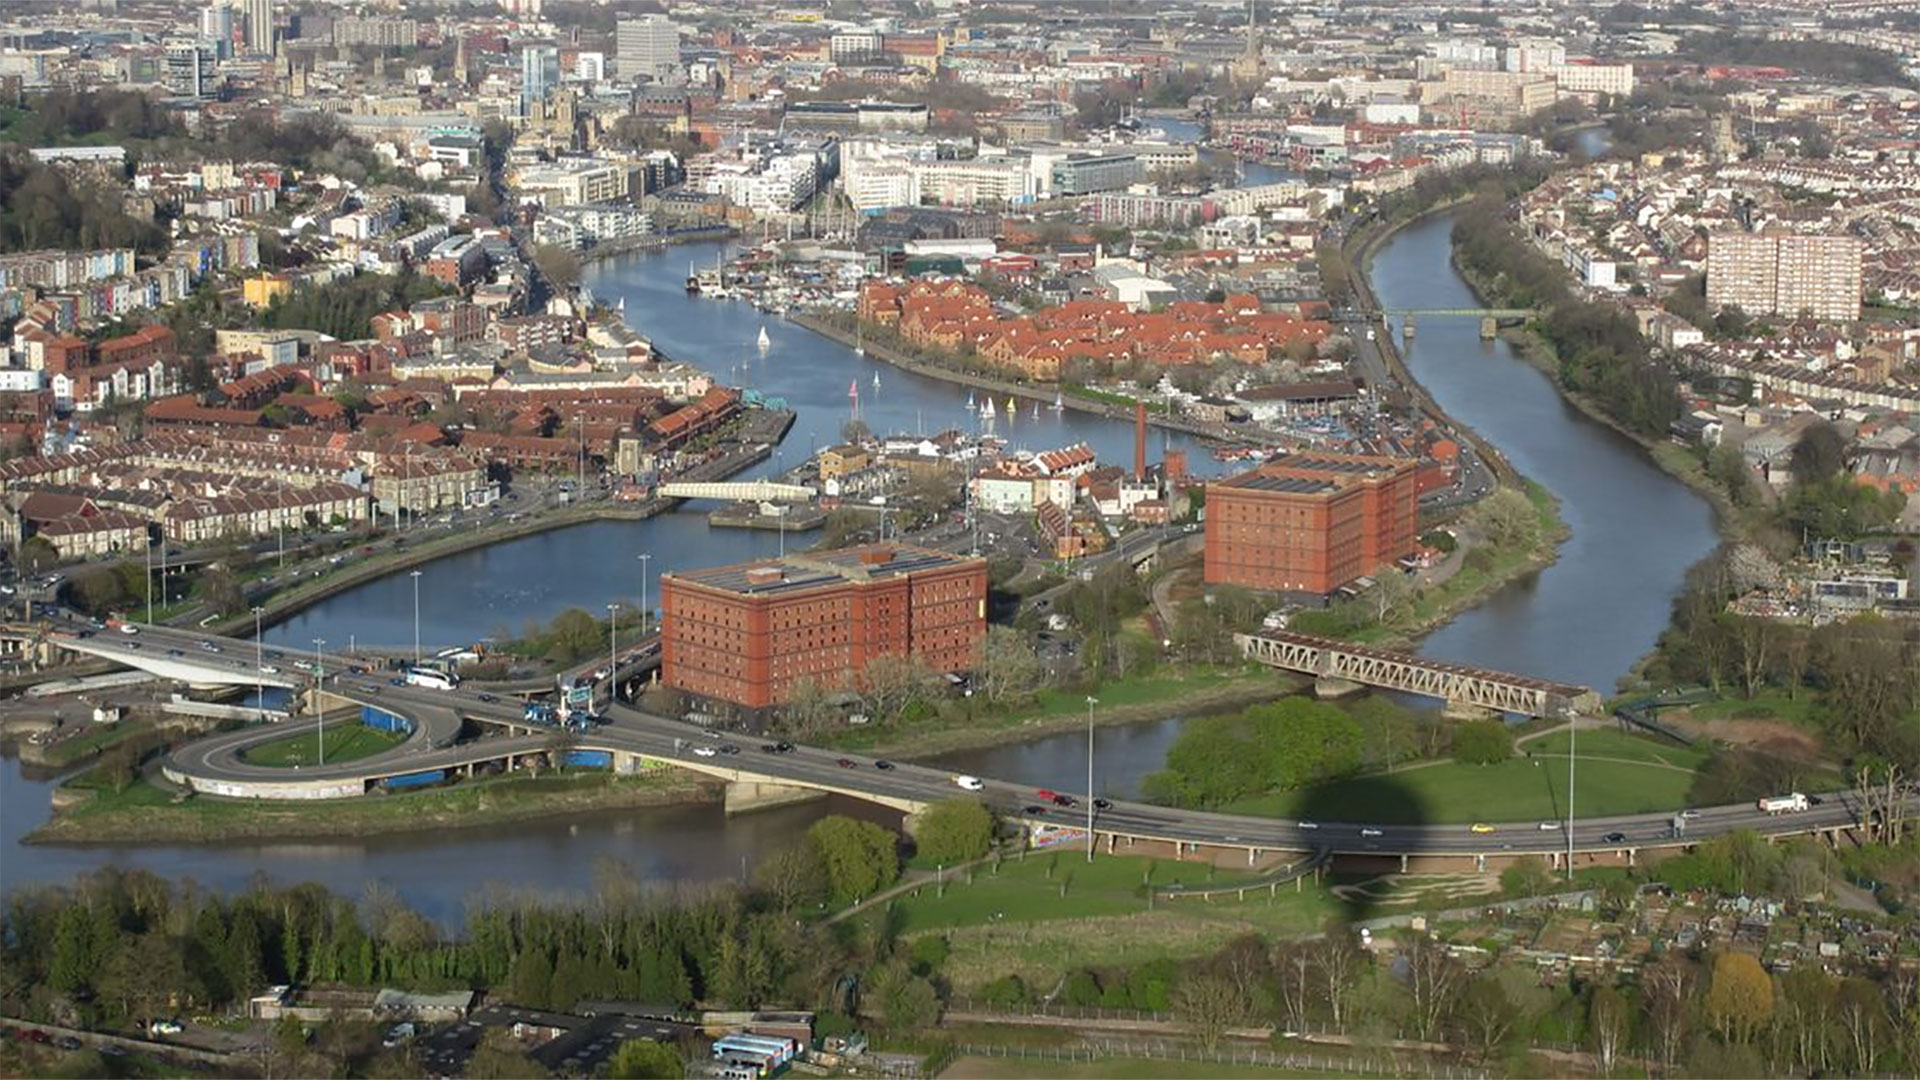 Industrial & Maritime Heritage At Risk In Bristol's Western Harbour